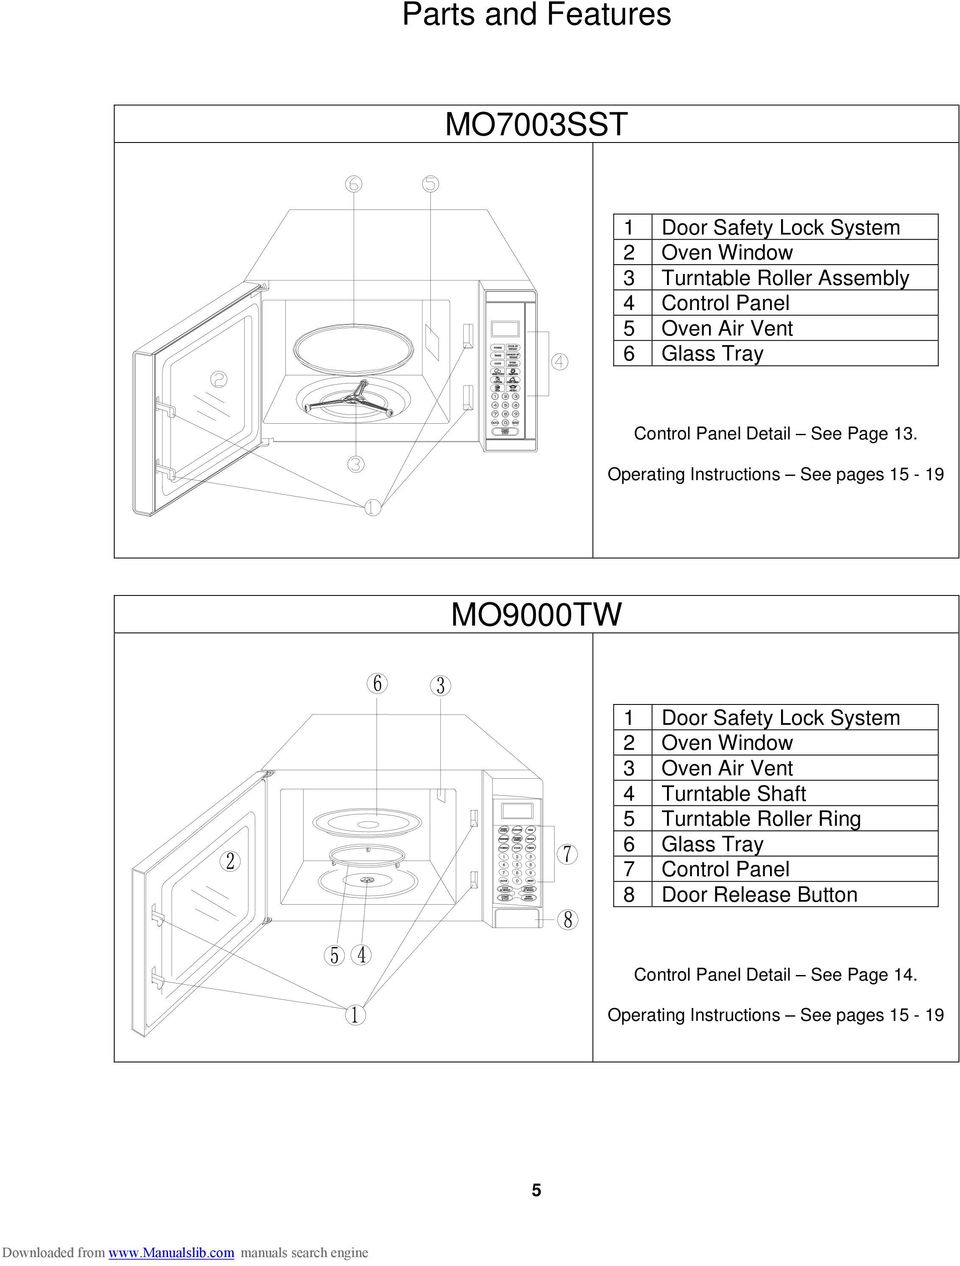 Operating Instructions See pages 15-19 MO9000TW 1 Door Safety Lock System 2 Oven Window 3 Oven Air Vent 4